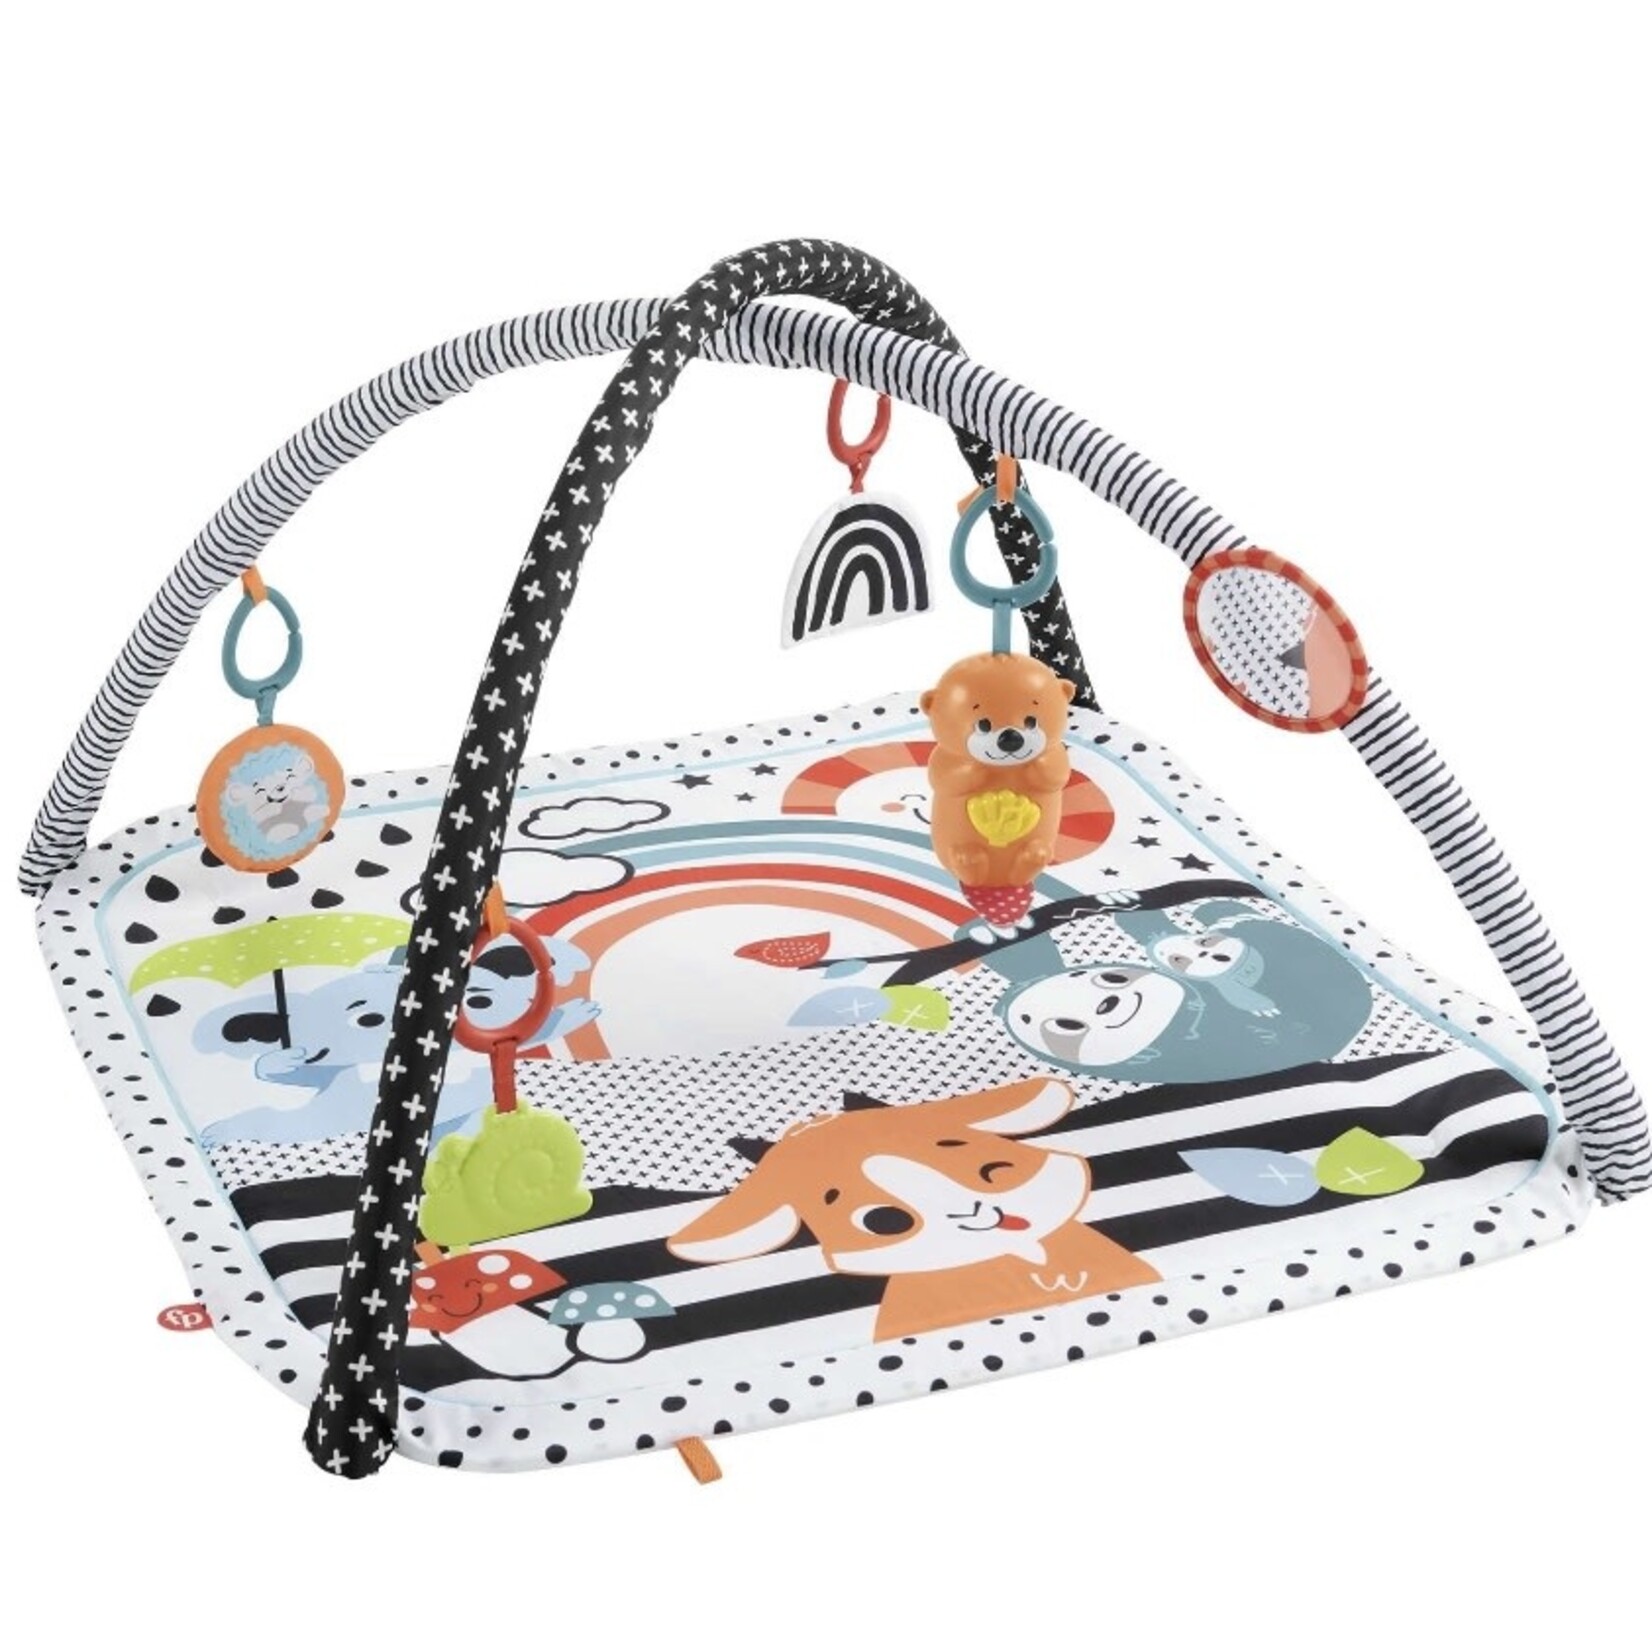 Discount Central Fisher-Price 3-in-1 Music Glow and Grow Gym Infant Playmat with Lights & Removable Toys